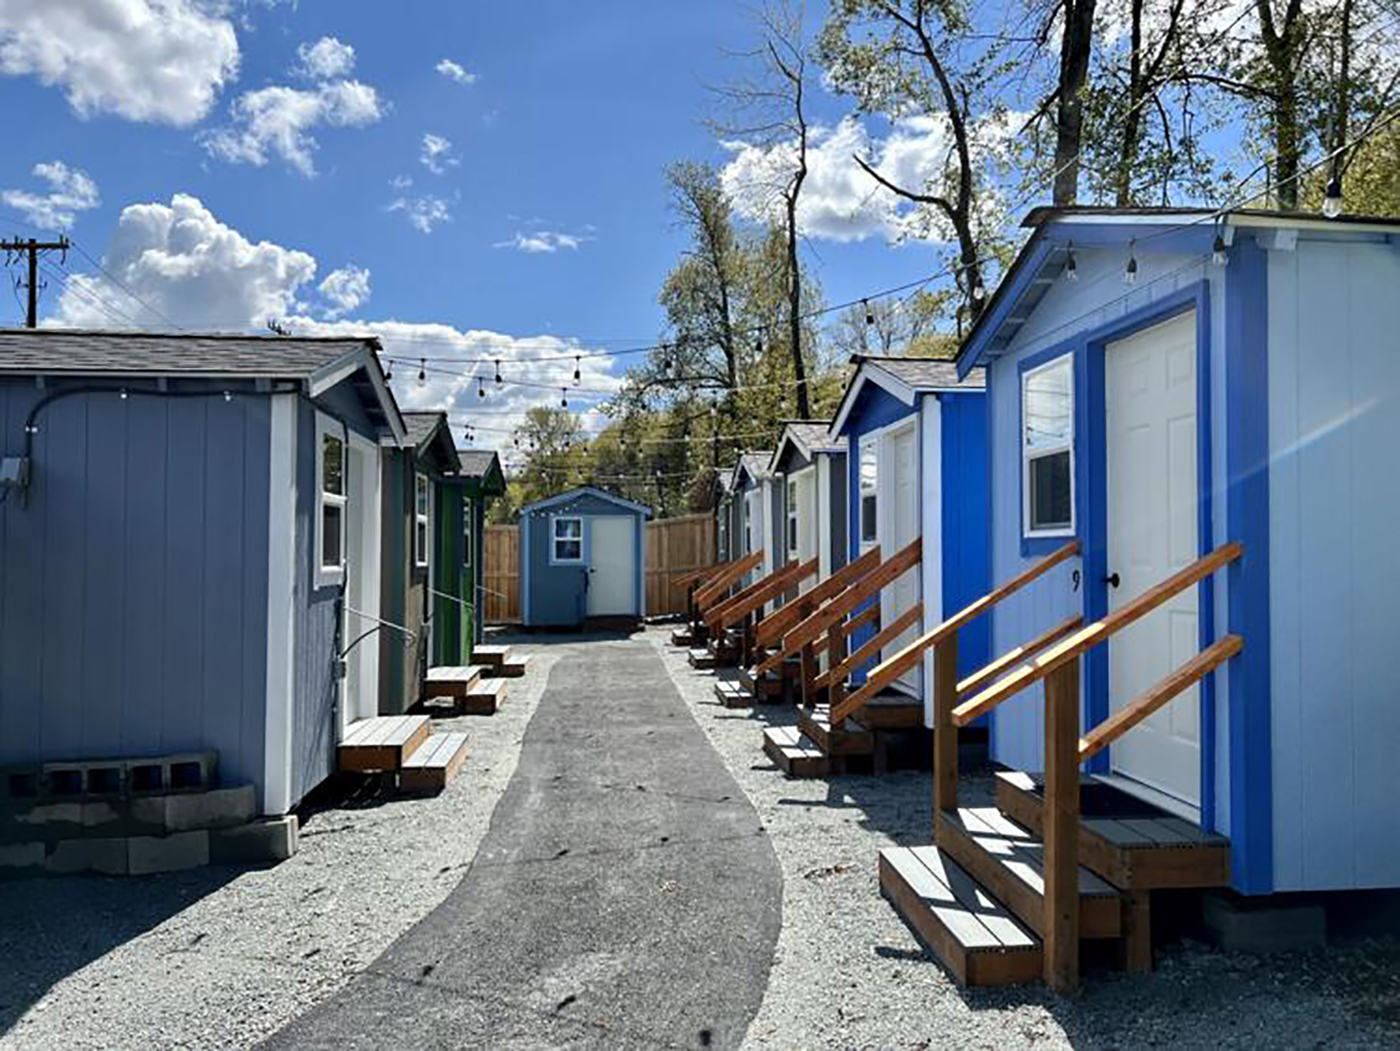 Seattle's tiny homes get a big upgrade